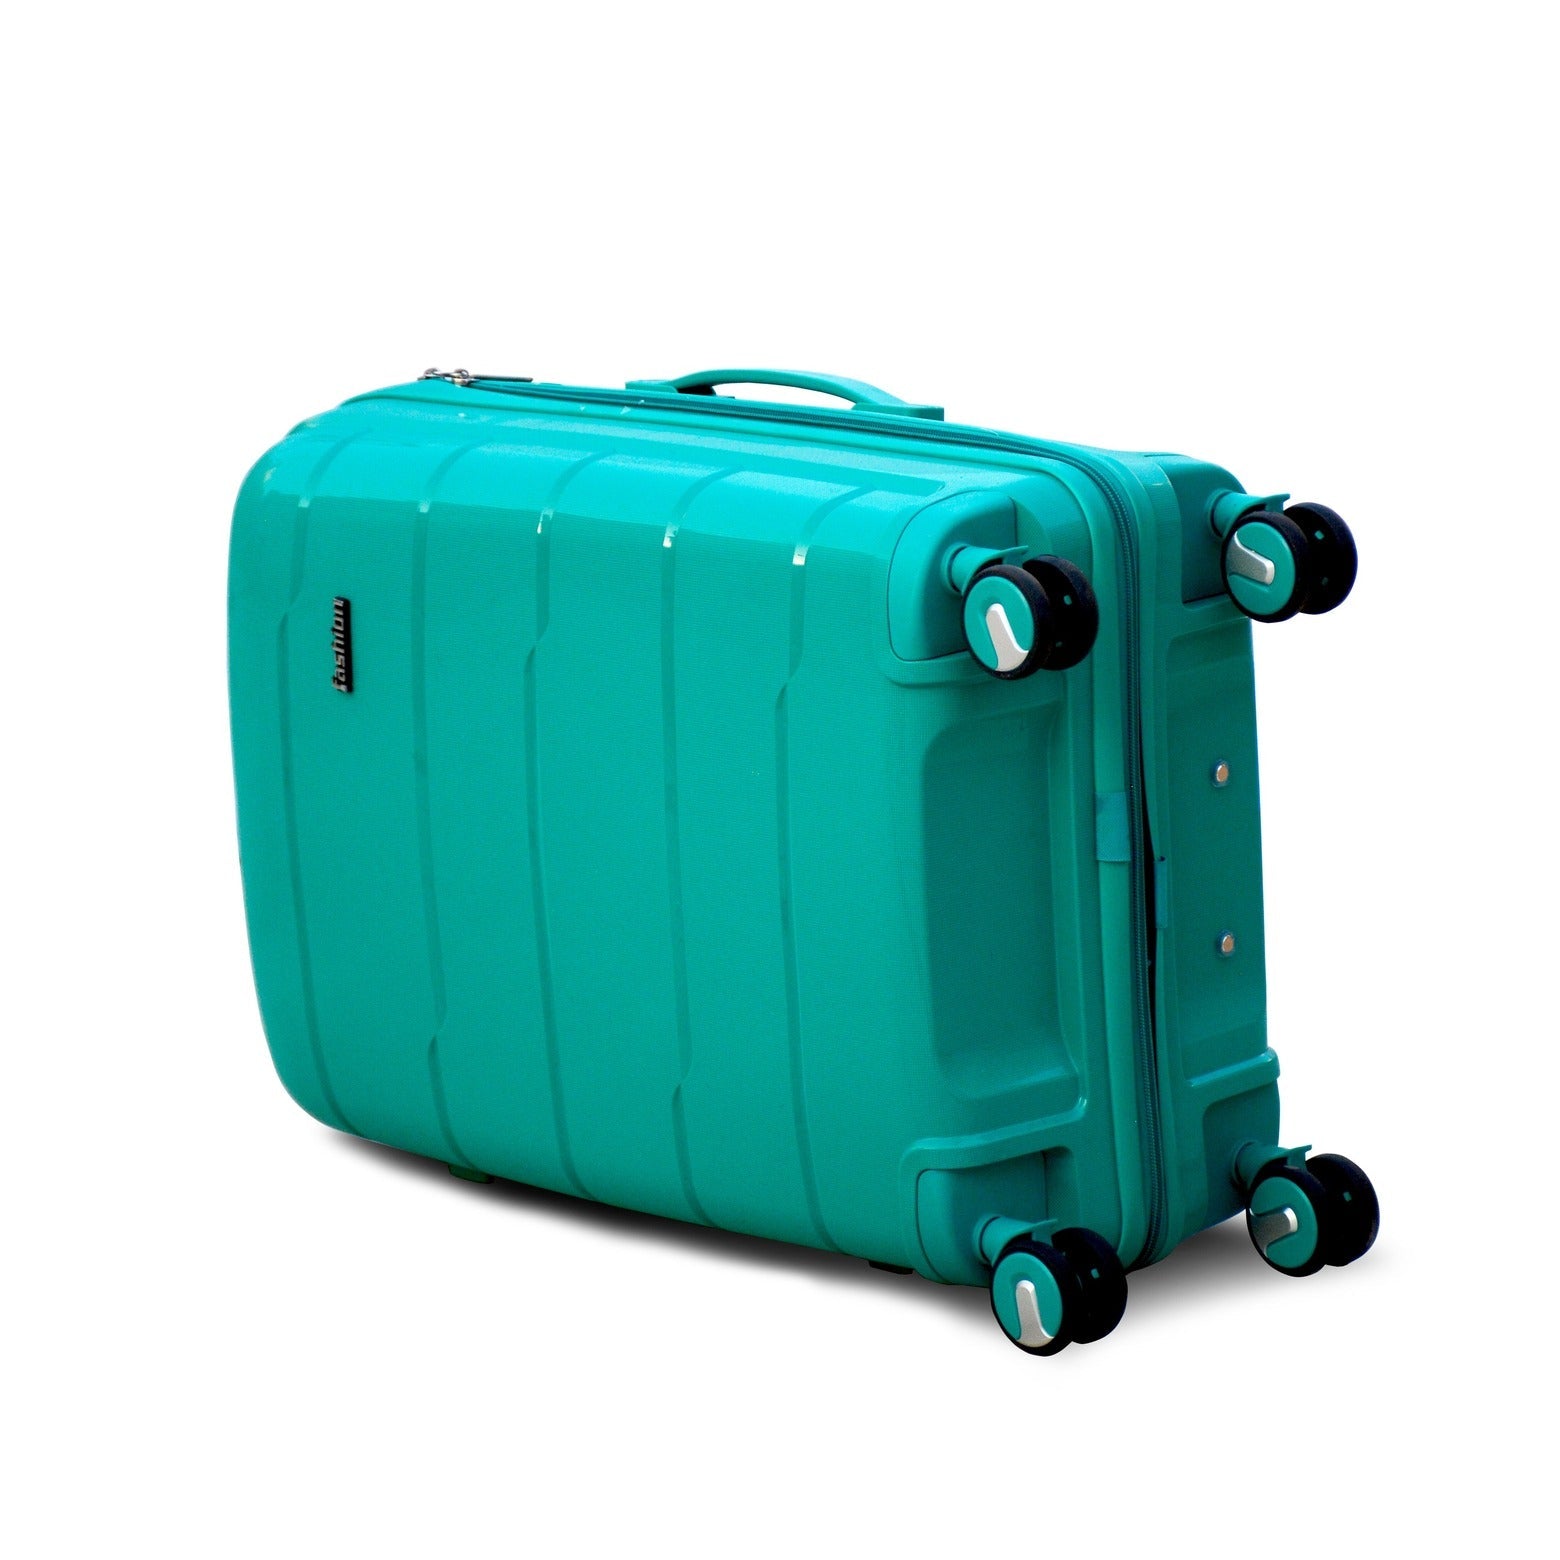 28" Dark Green Colour Ceramic Smooth PP Lightweight Luggage Bag with Double Spinner Wheel